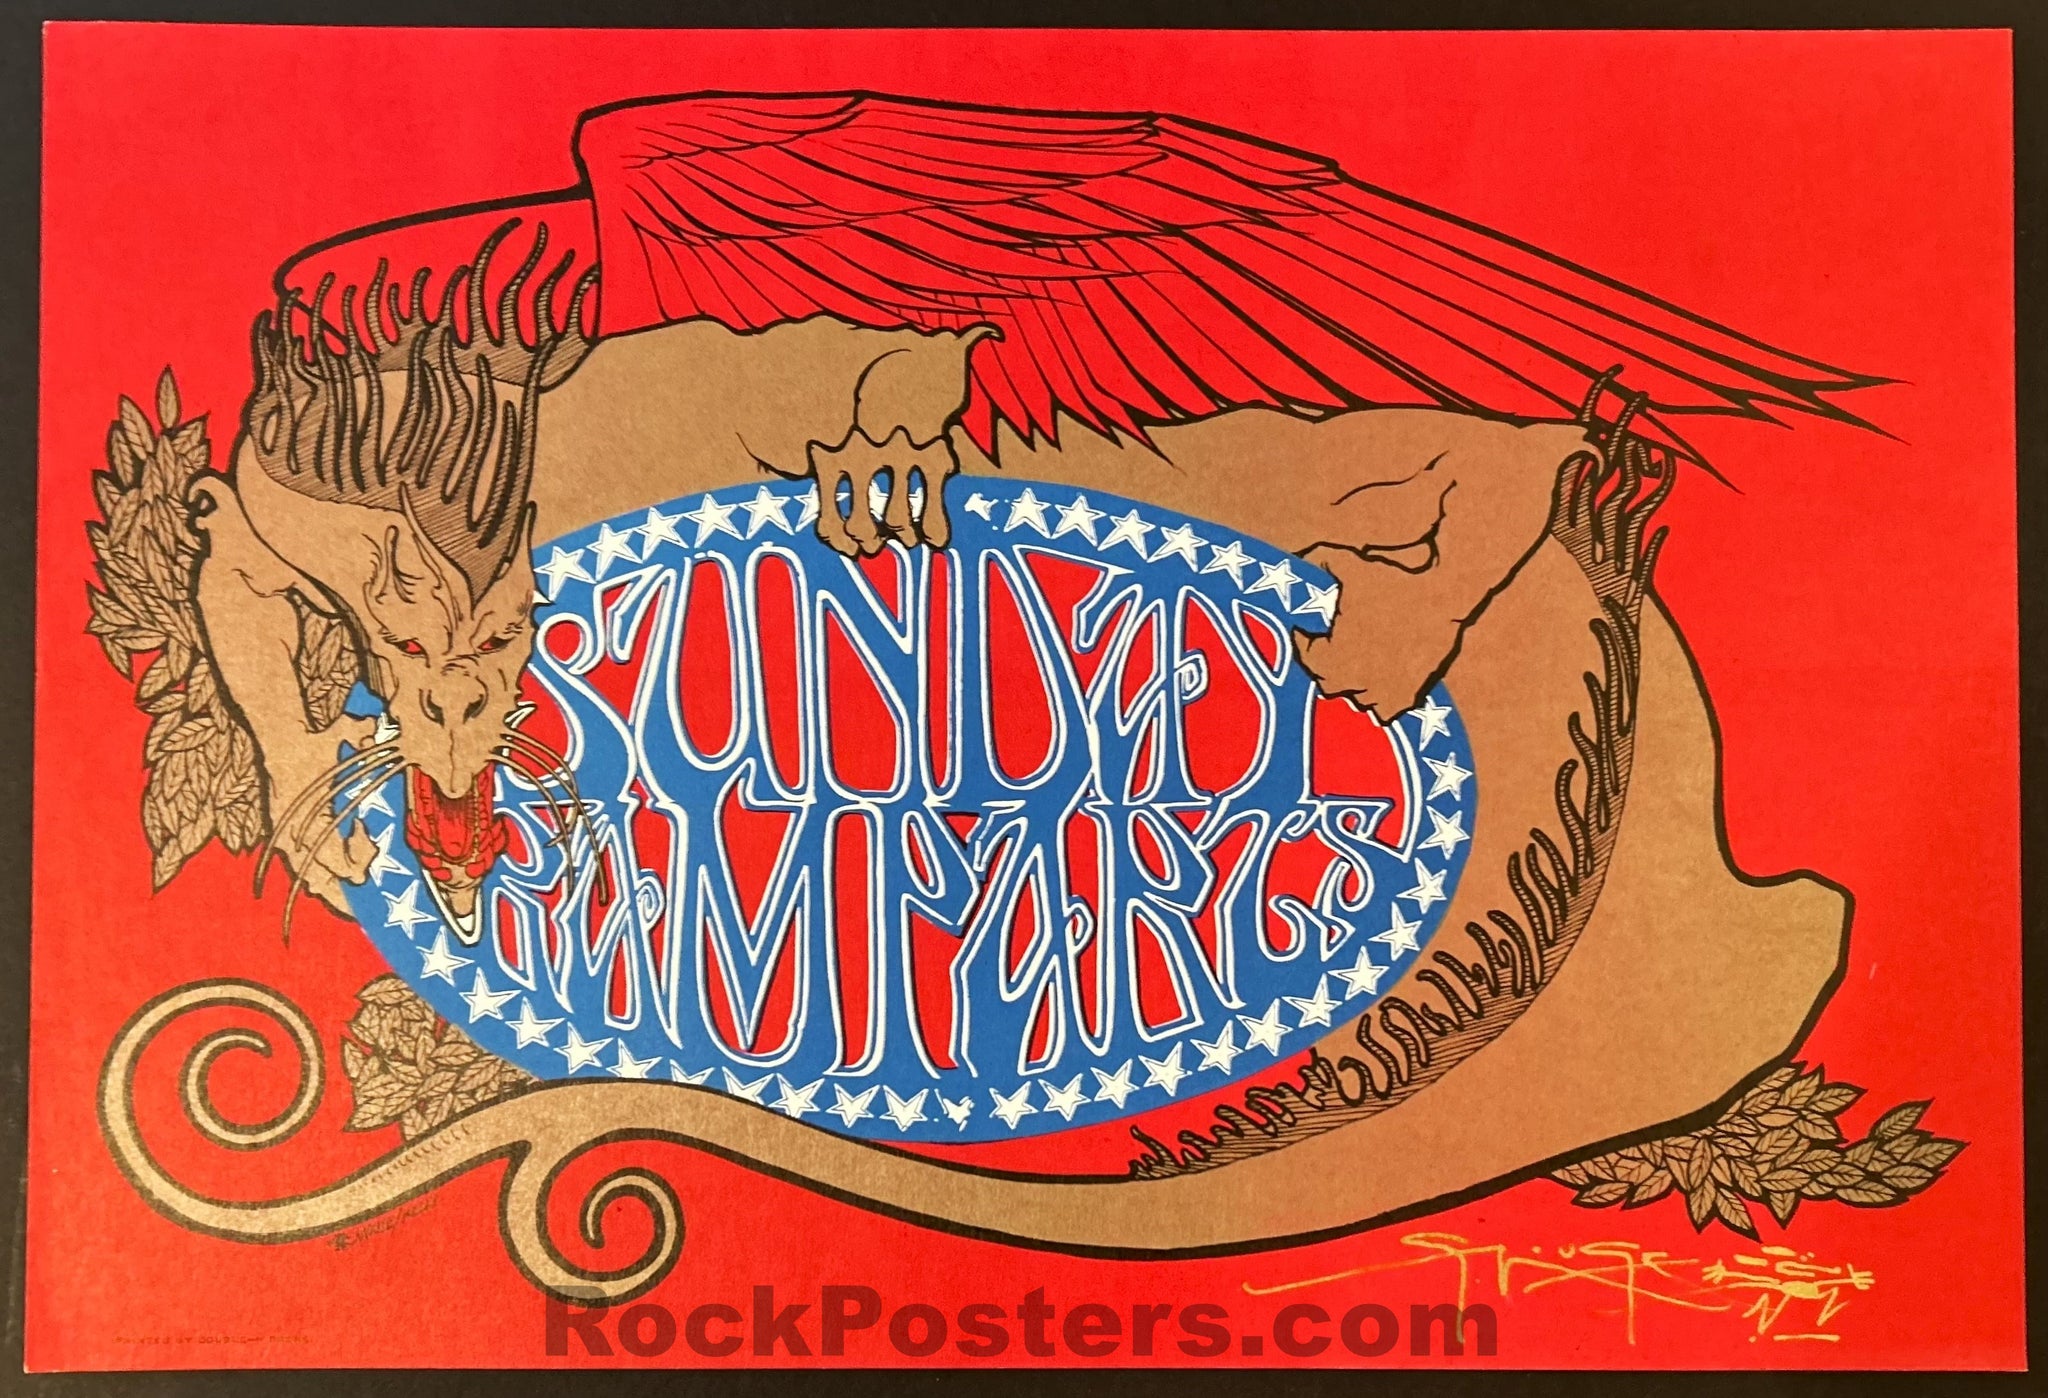 AUCTION - Sunday Ramparts - Stanley Mouse Signed - 1967 Original Poster - San Francisco - Near Mint